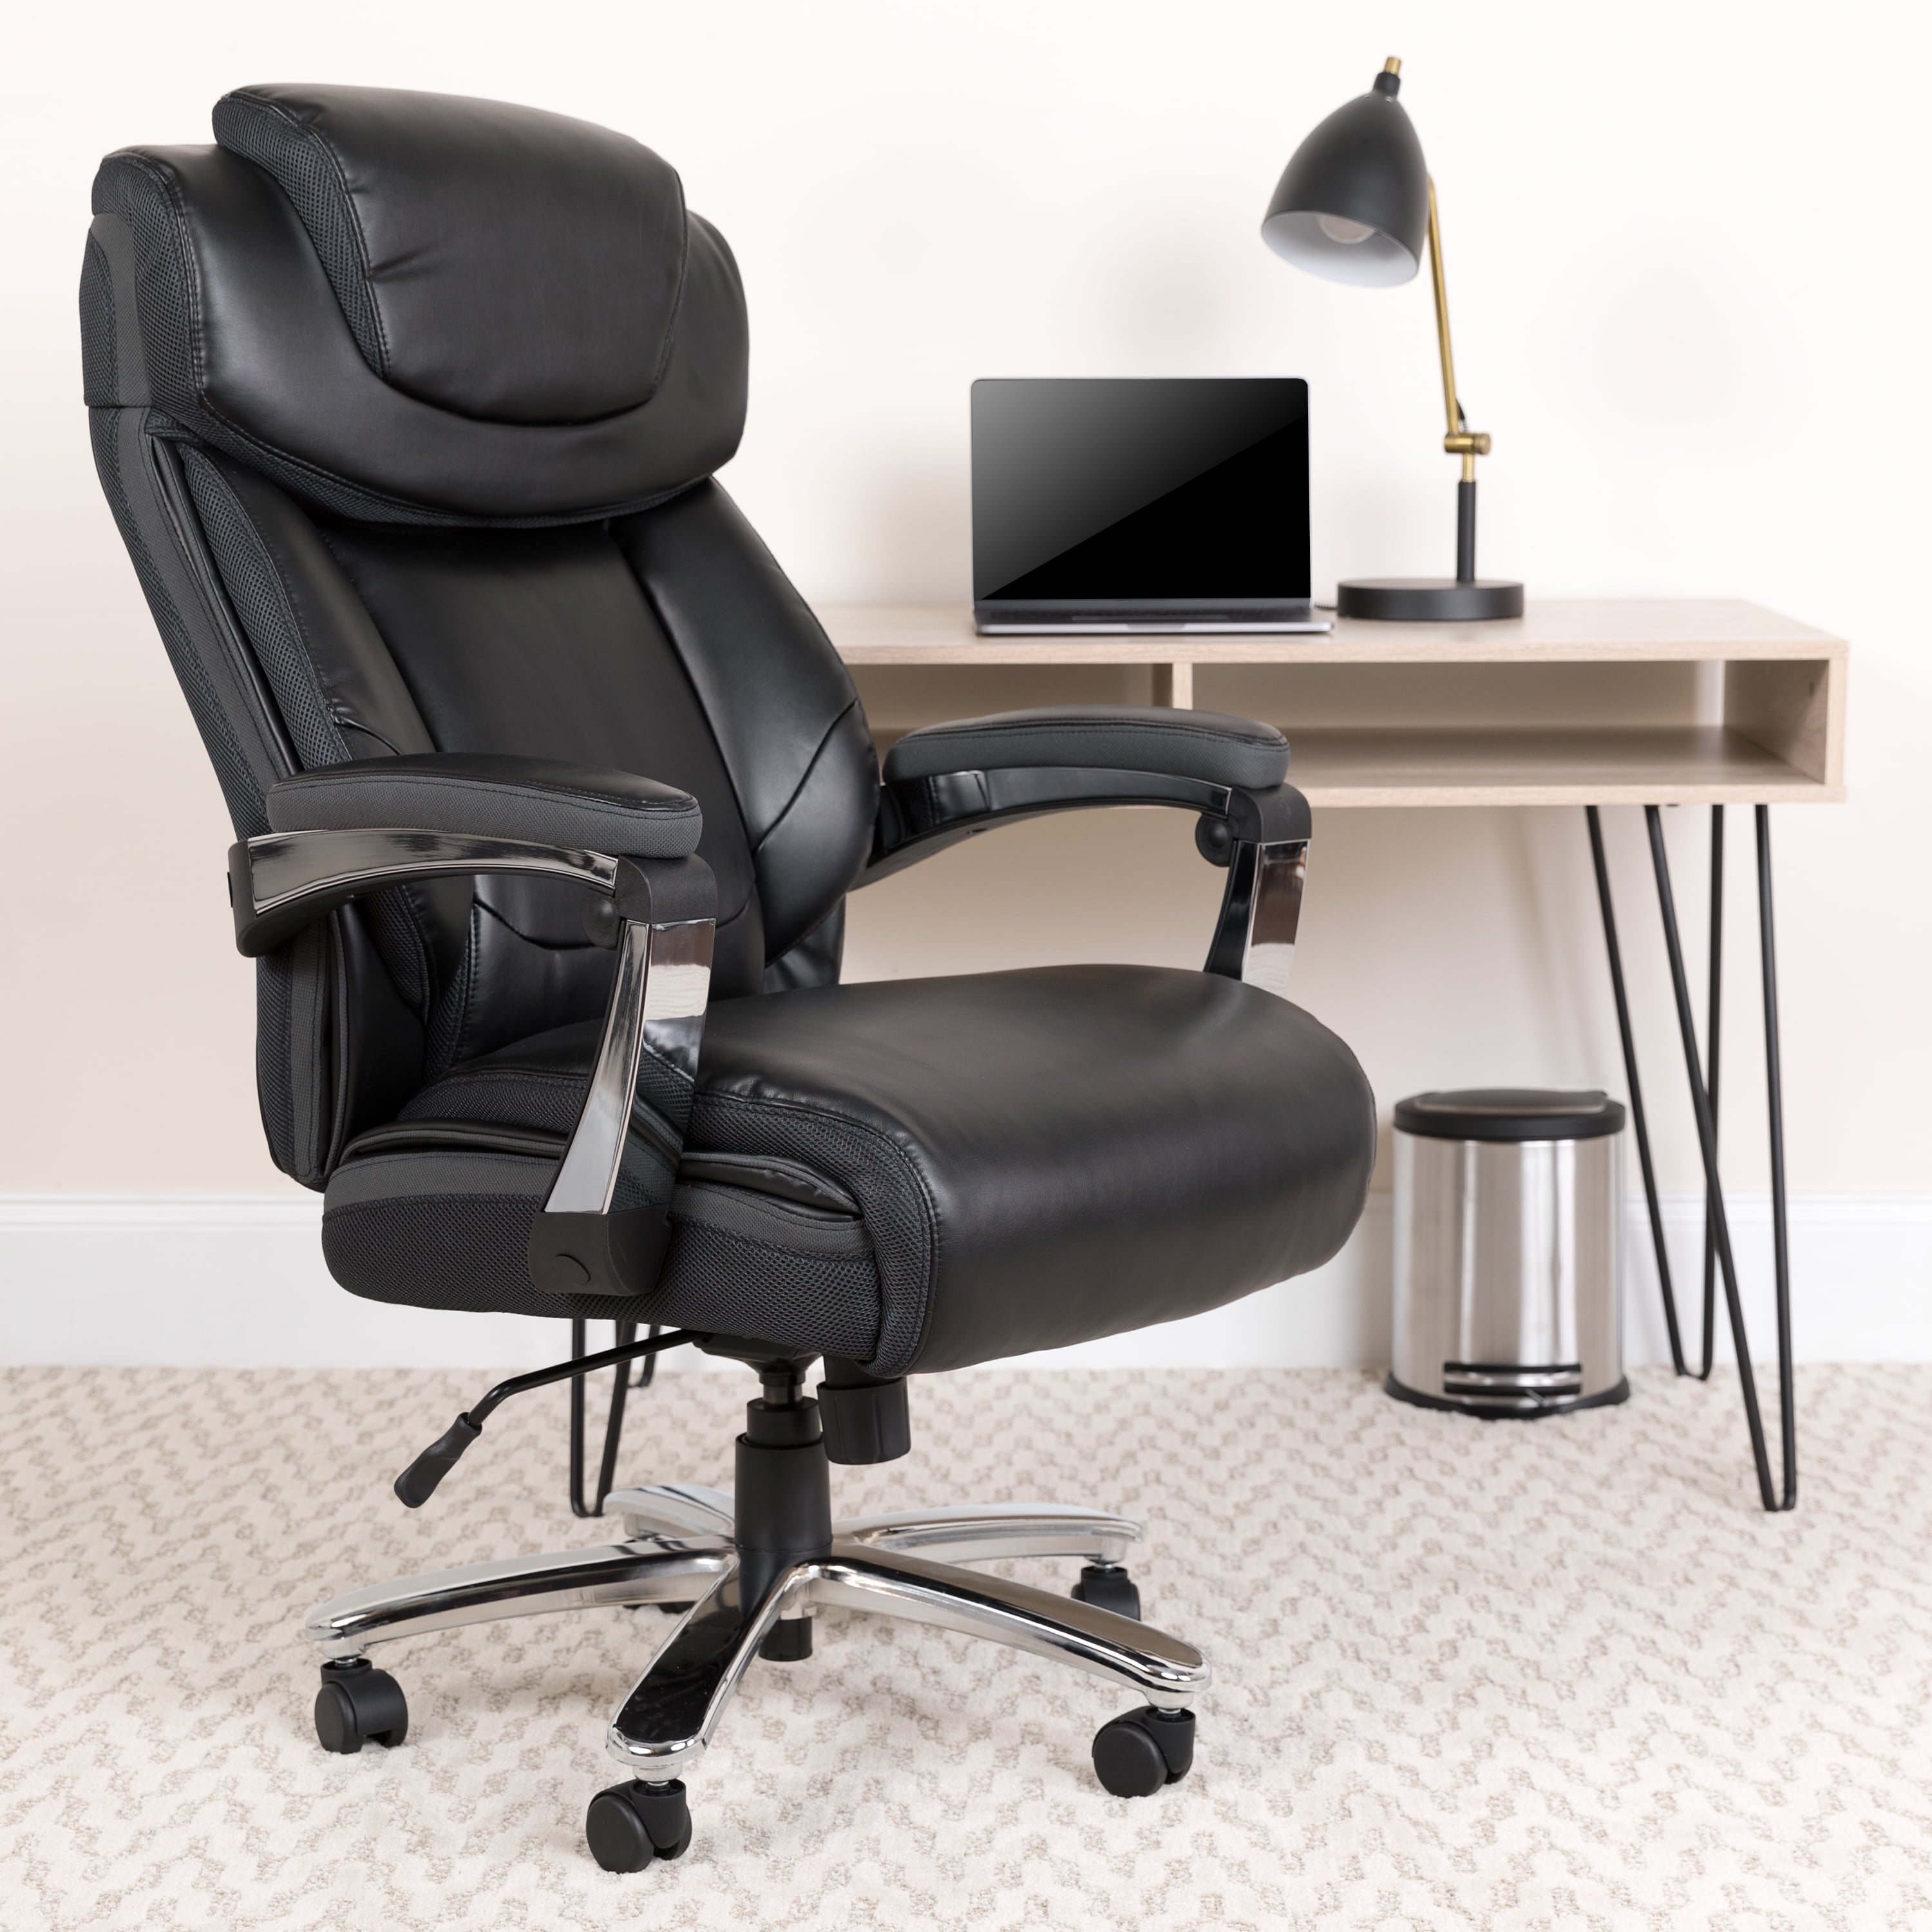 Details about   Serta Big and Tall Leather Commercial Office Chair with Memory Foam Brown 